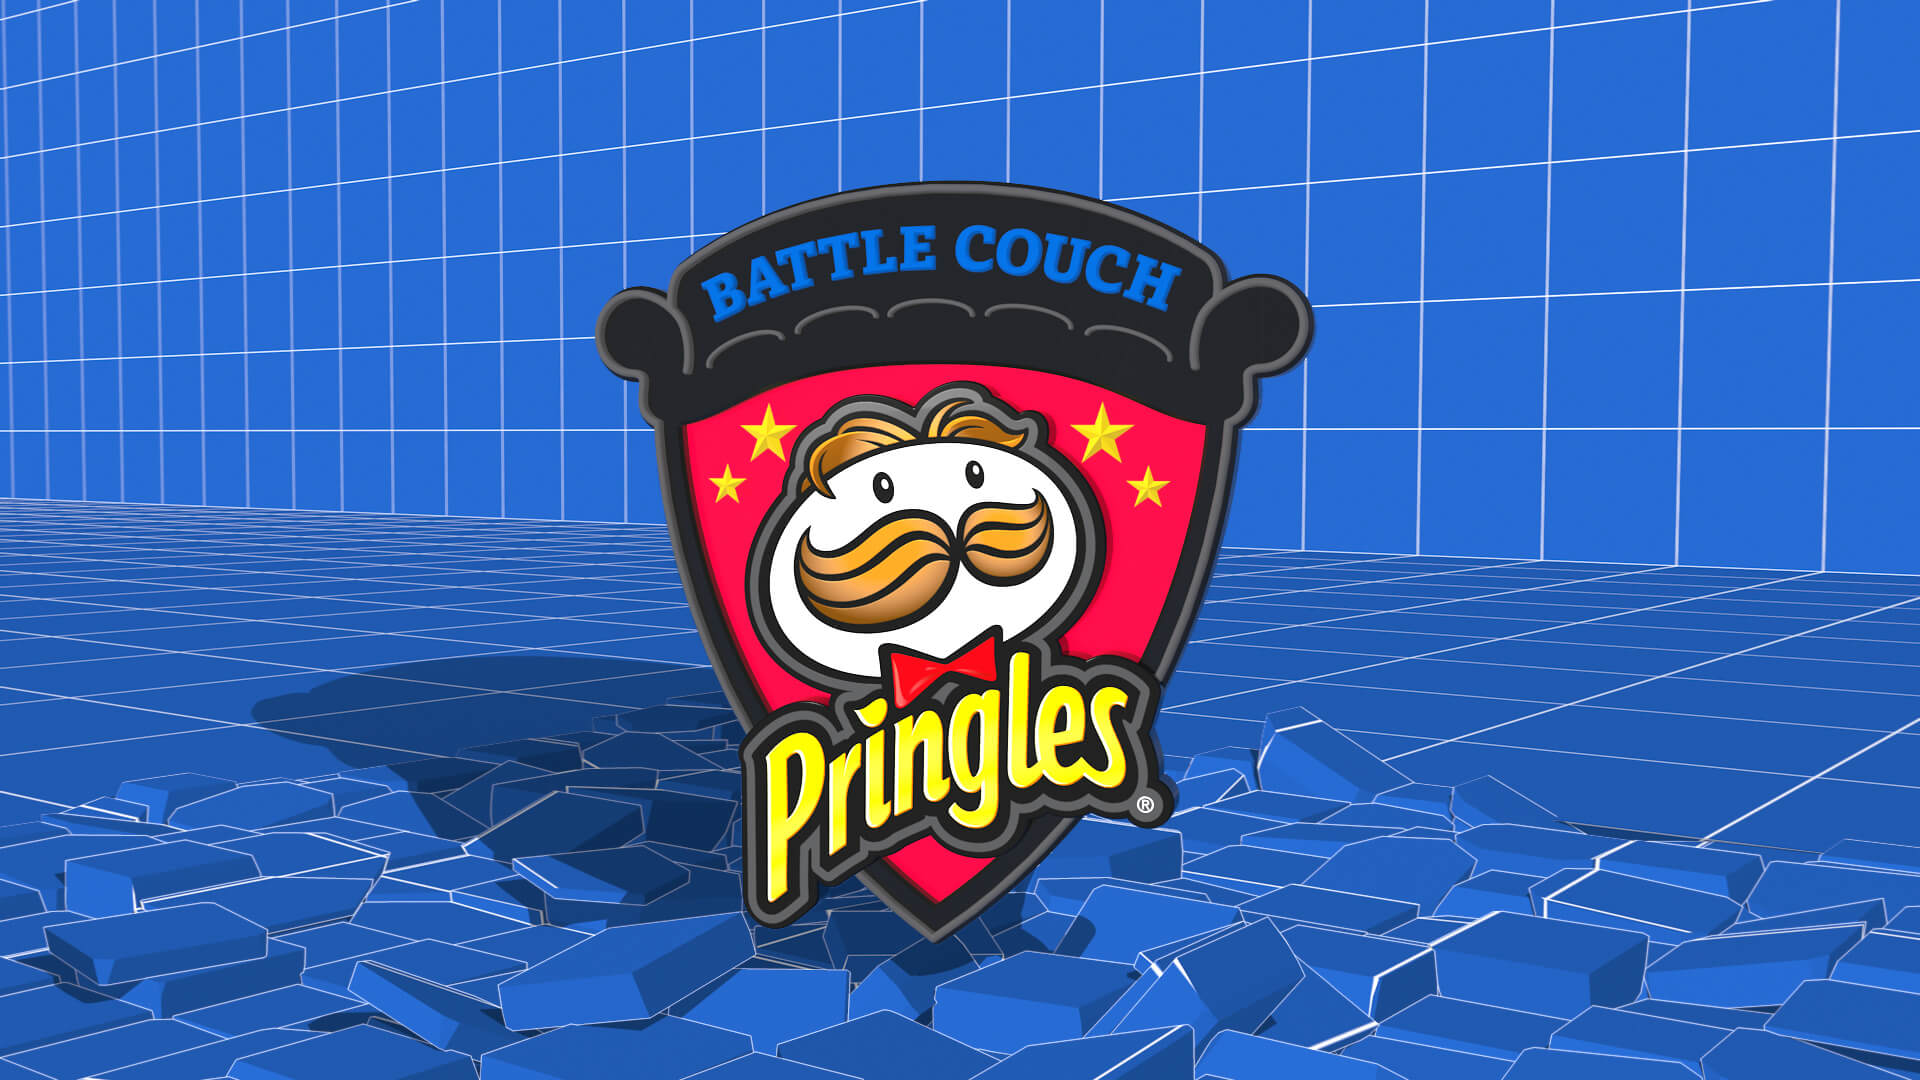 Pringles – Twitch Battle Couch